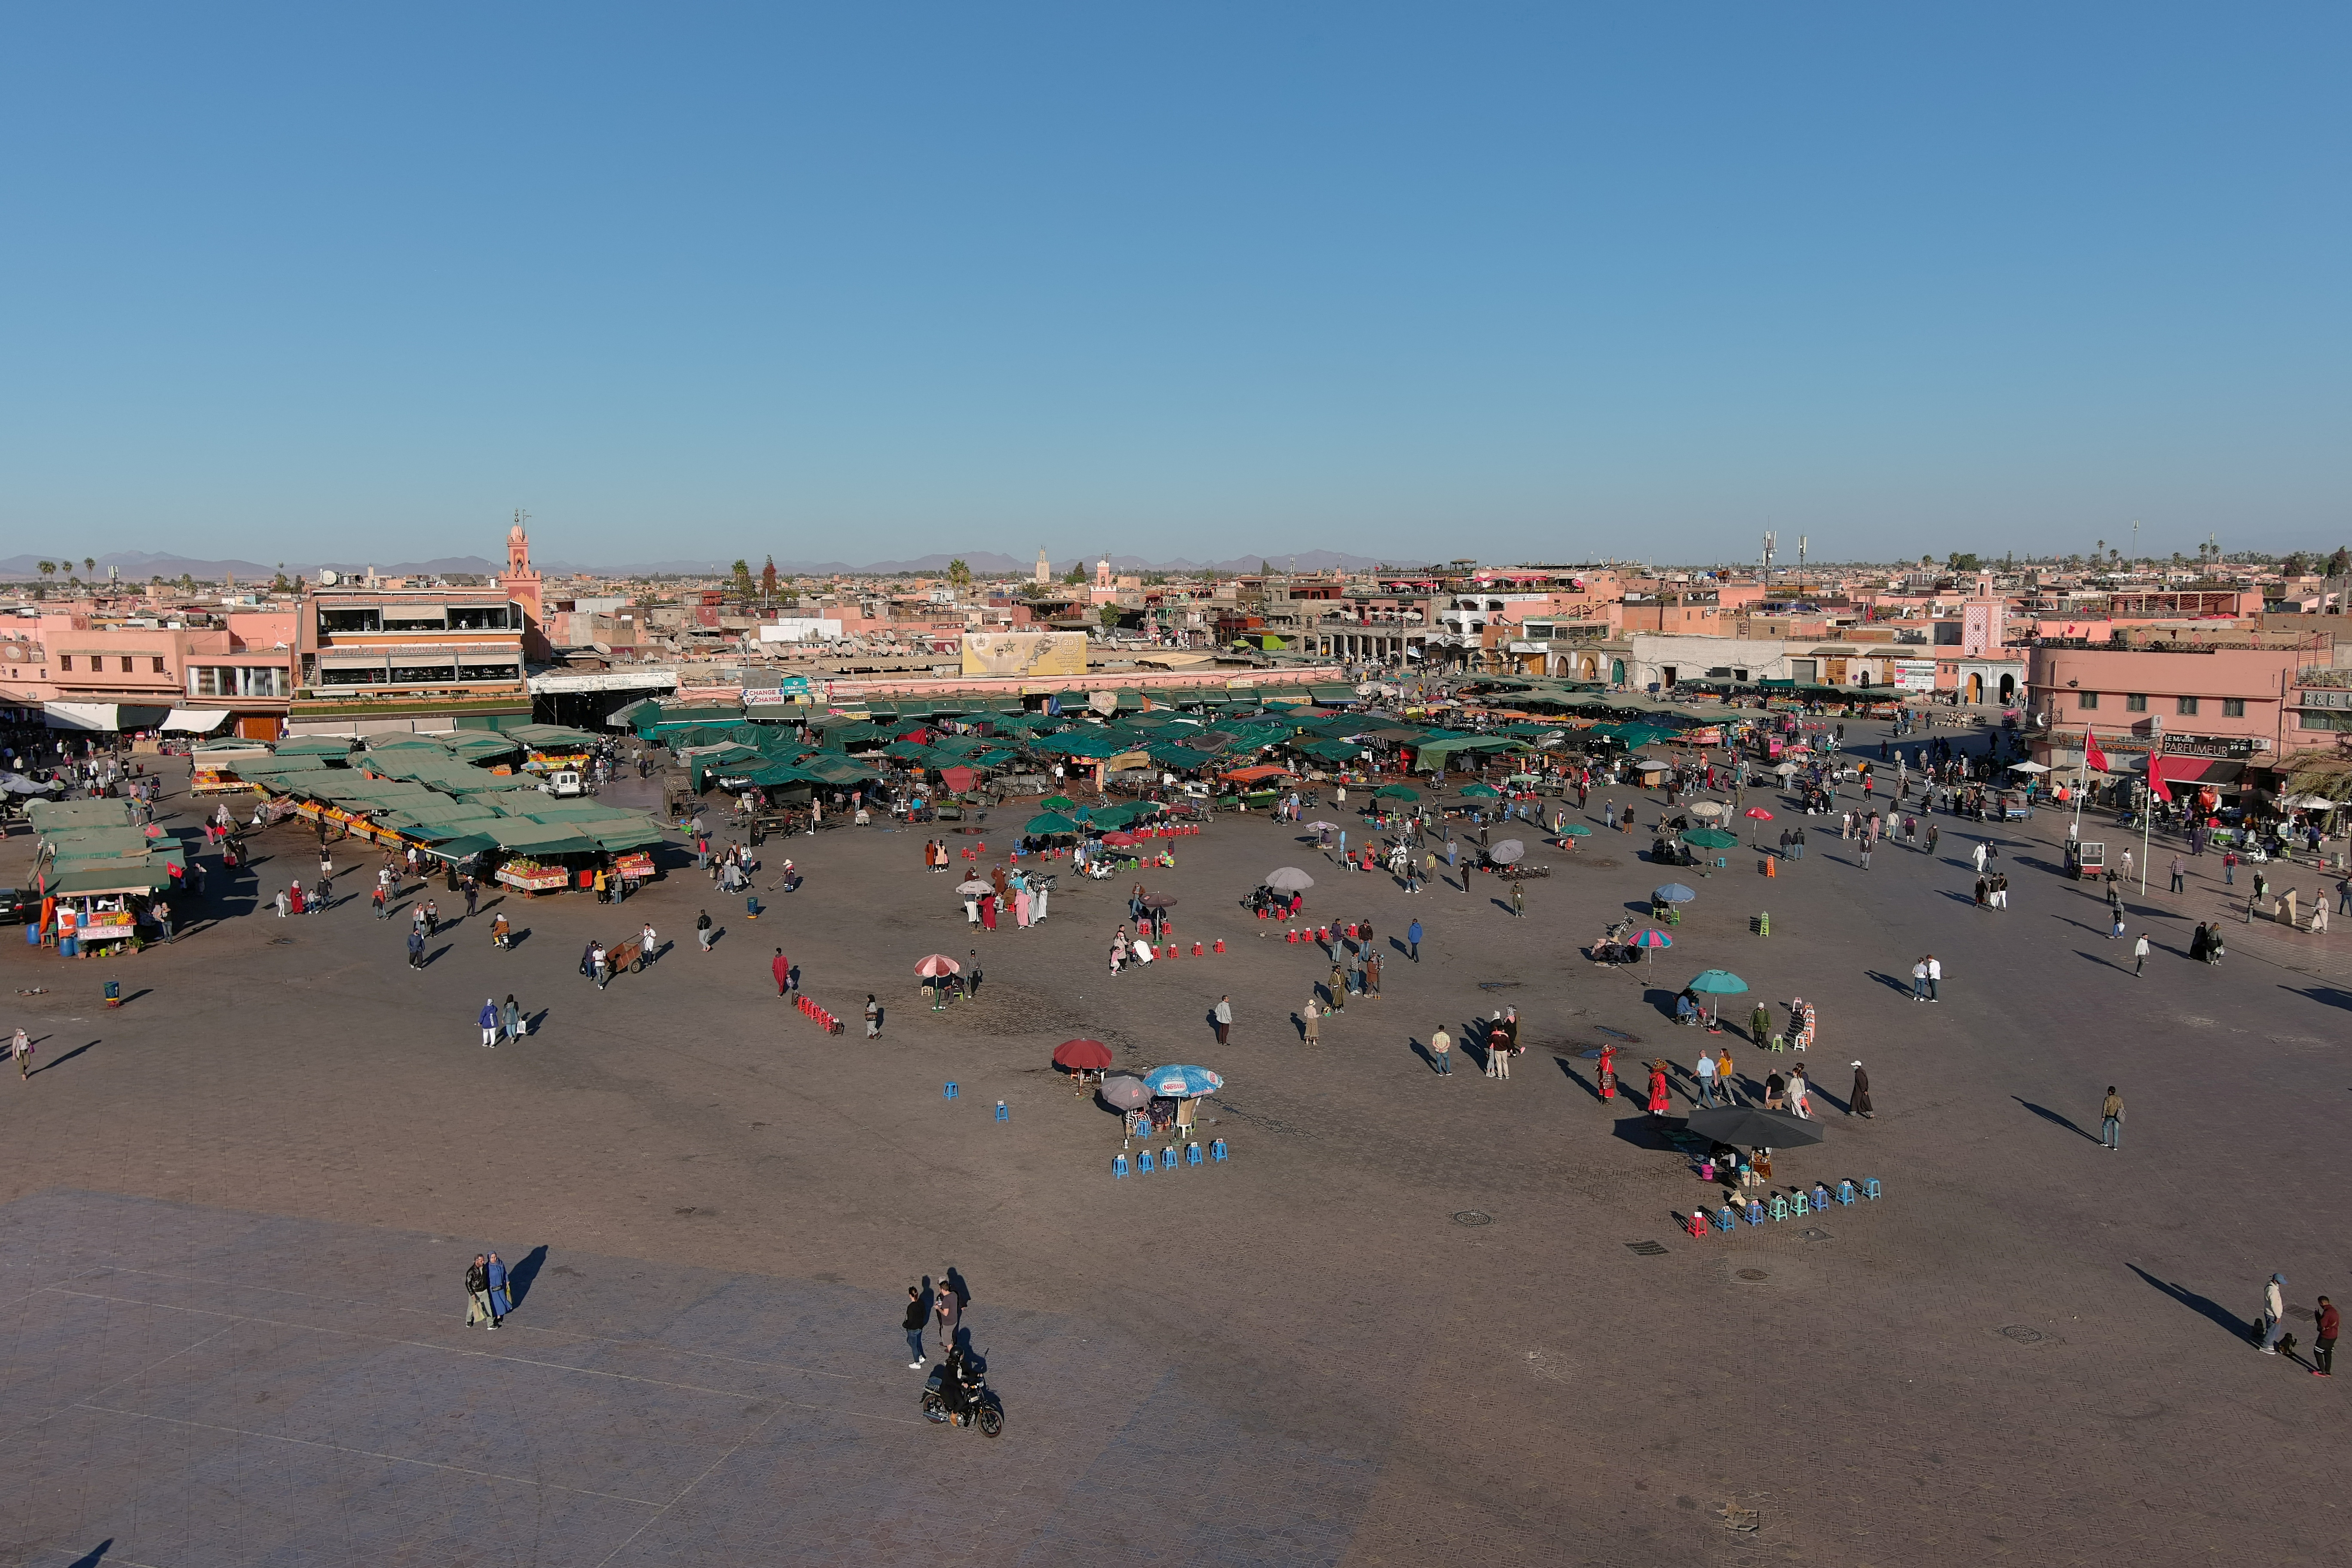 An aerial view of Jemaa el-Fna square and marketplace in Marrakech